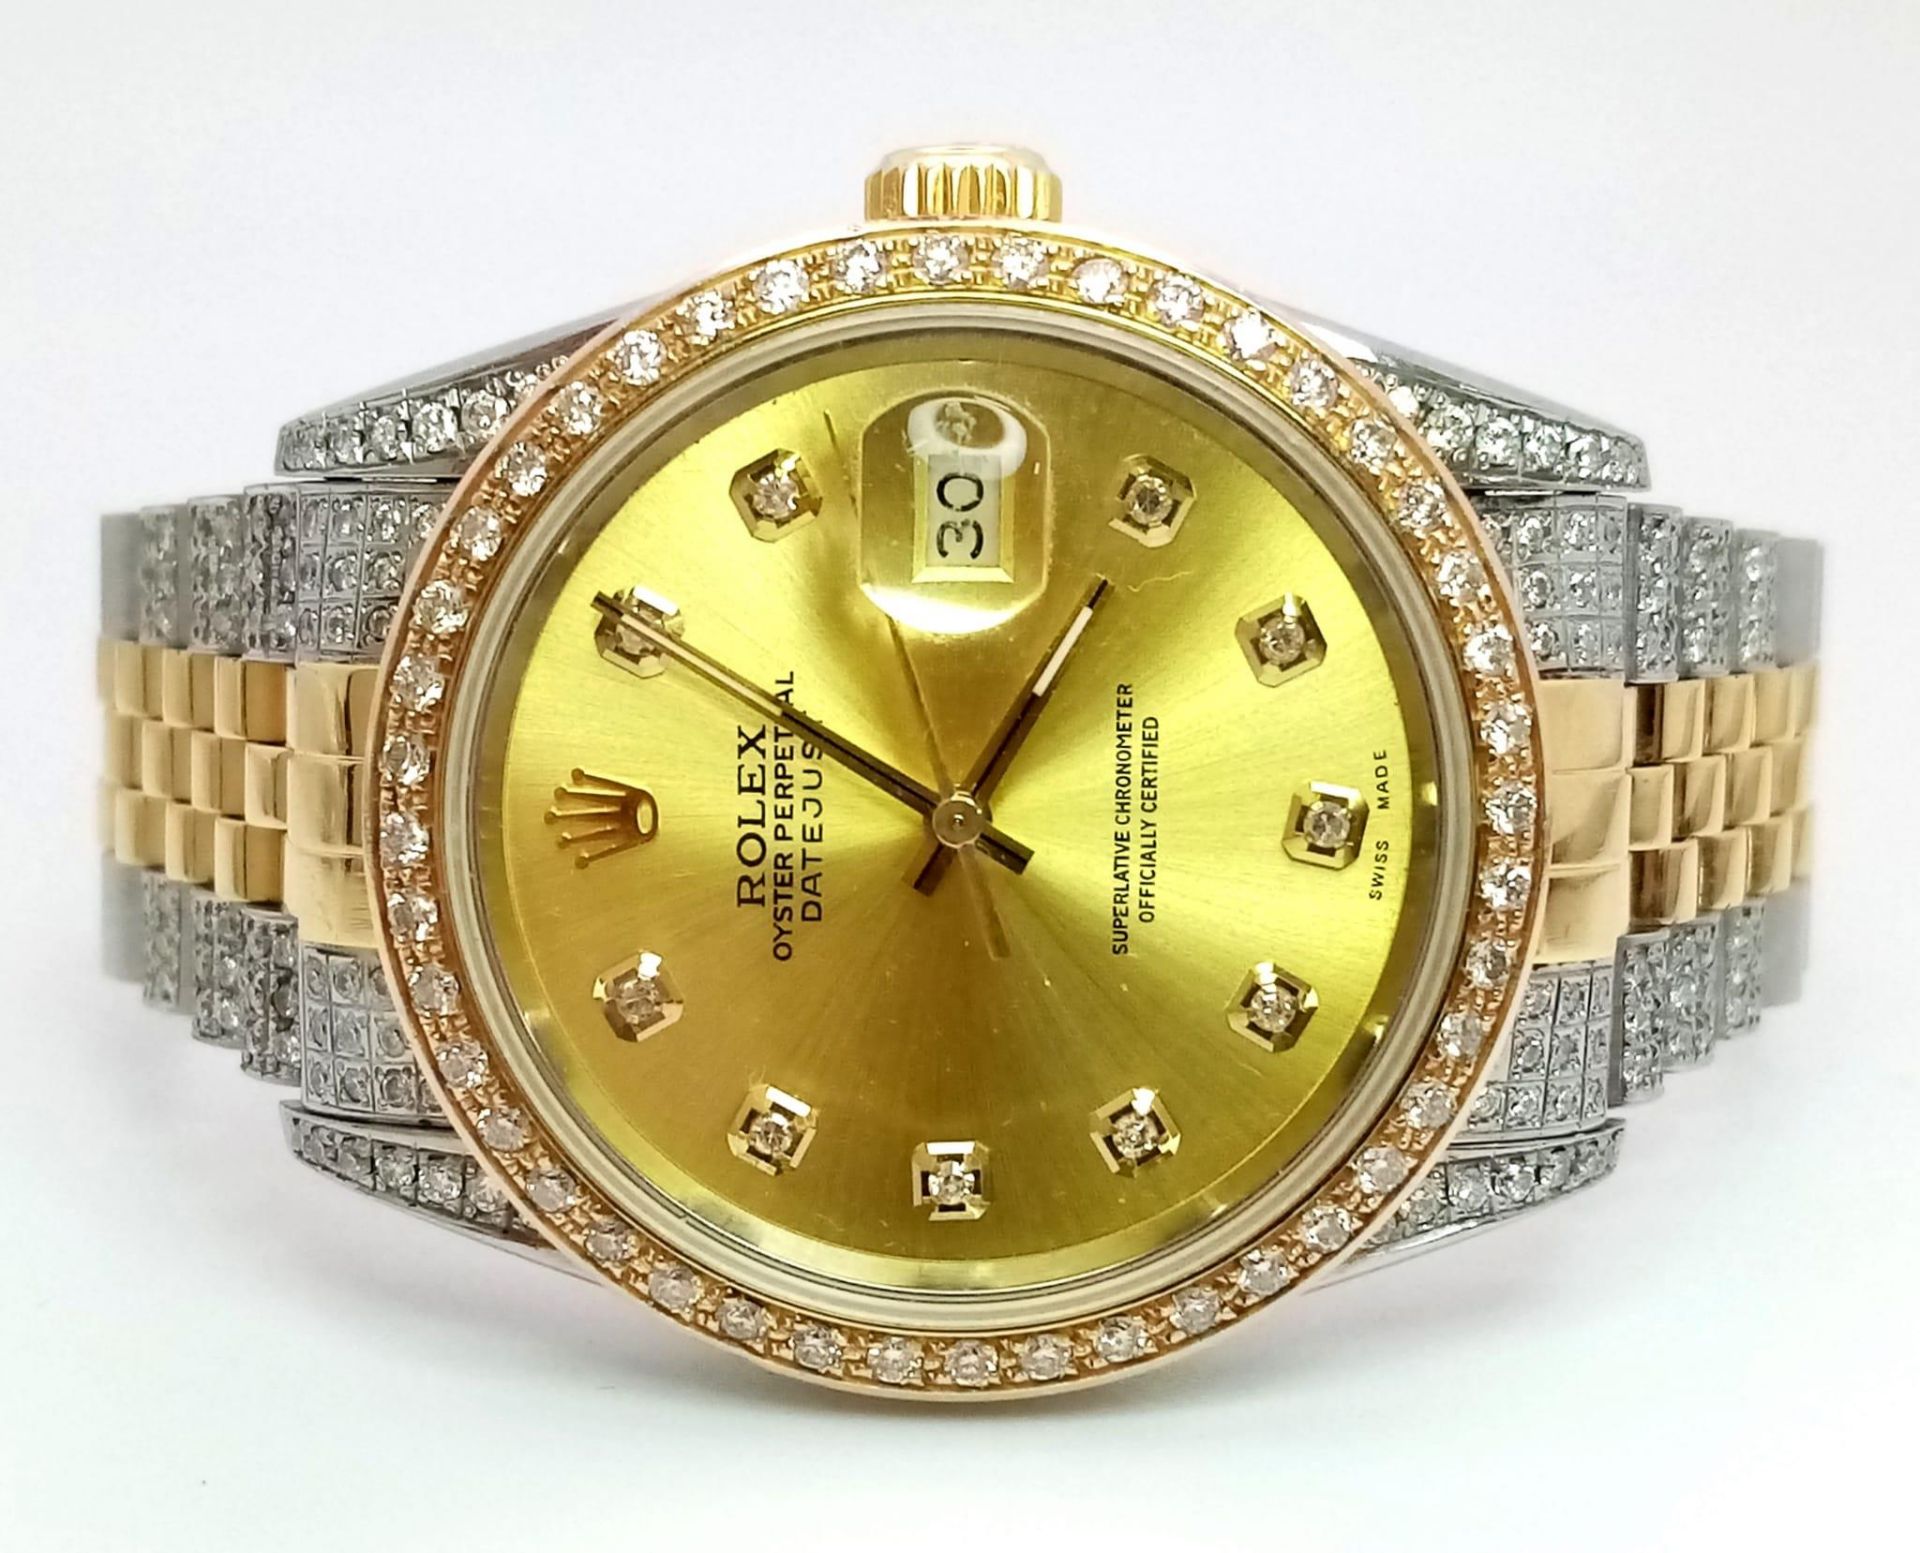 A Rolex Oyster Perpetual Datejust Bi-Metal Diamond Gents Watch. Gold, stainless steel and diamond - Image 5 of 15